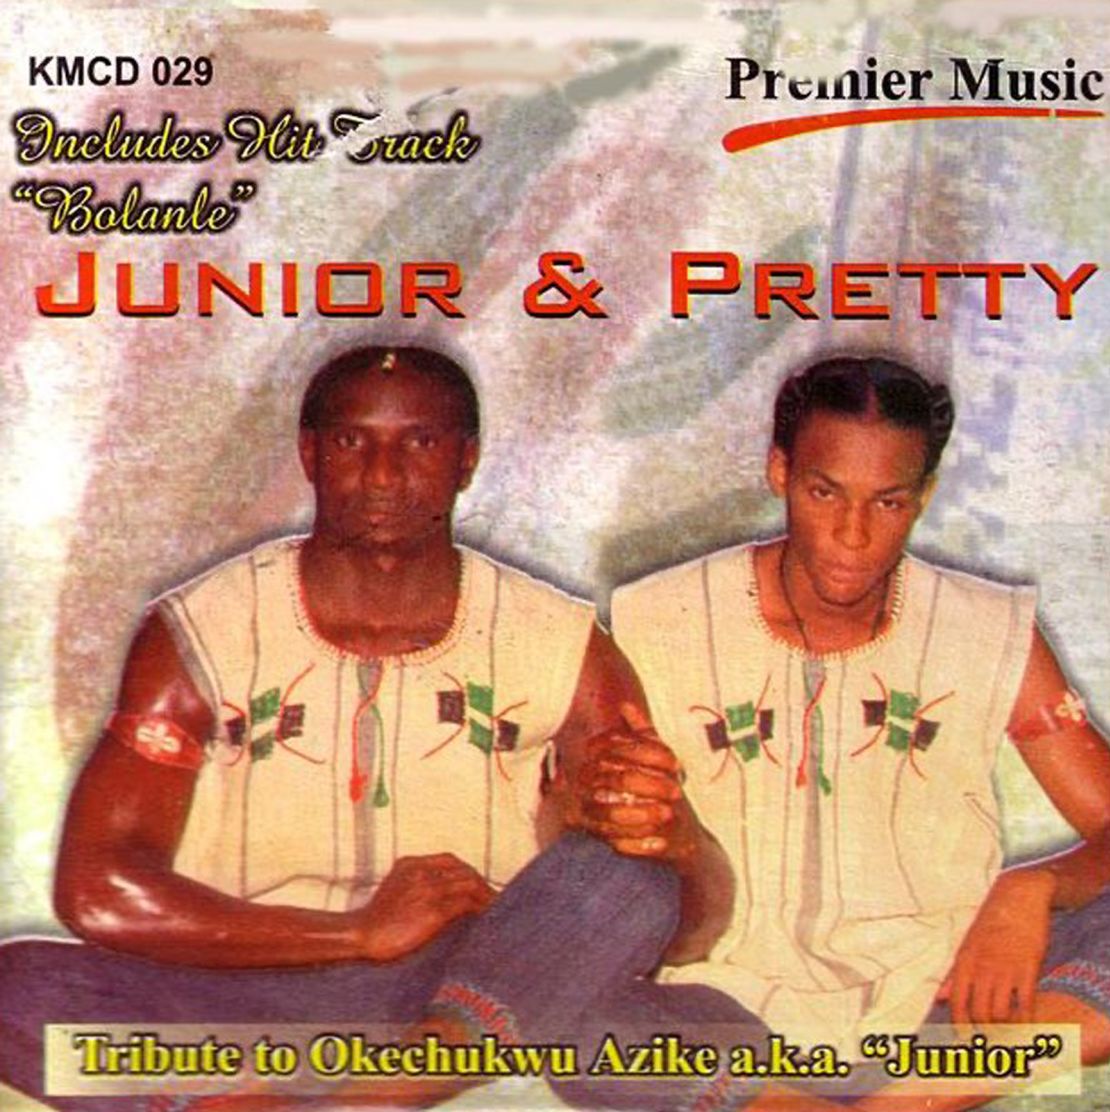 Junior and Pretty's "Tribute to Okechukwu Azike A.k.a. 'Junior'" (1994).